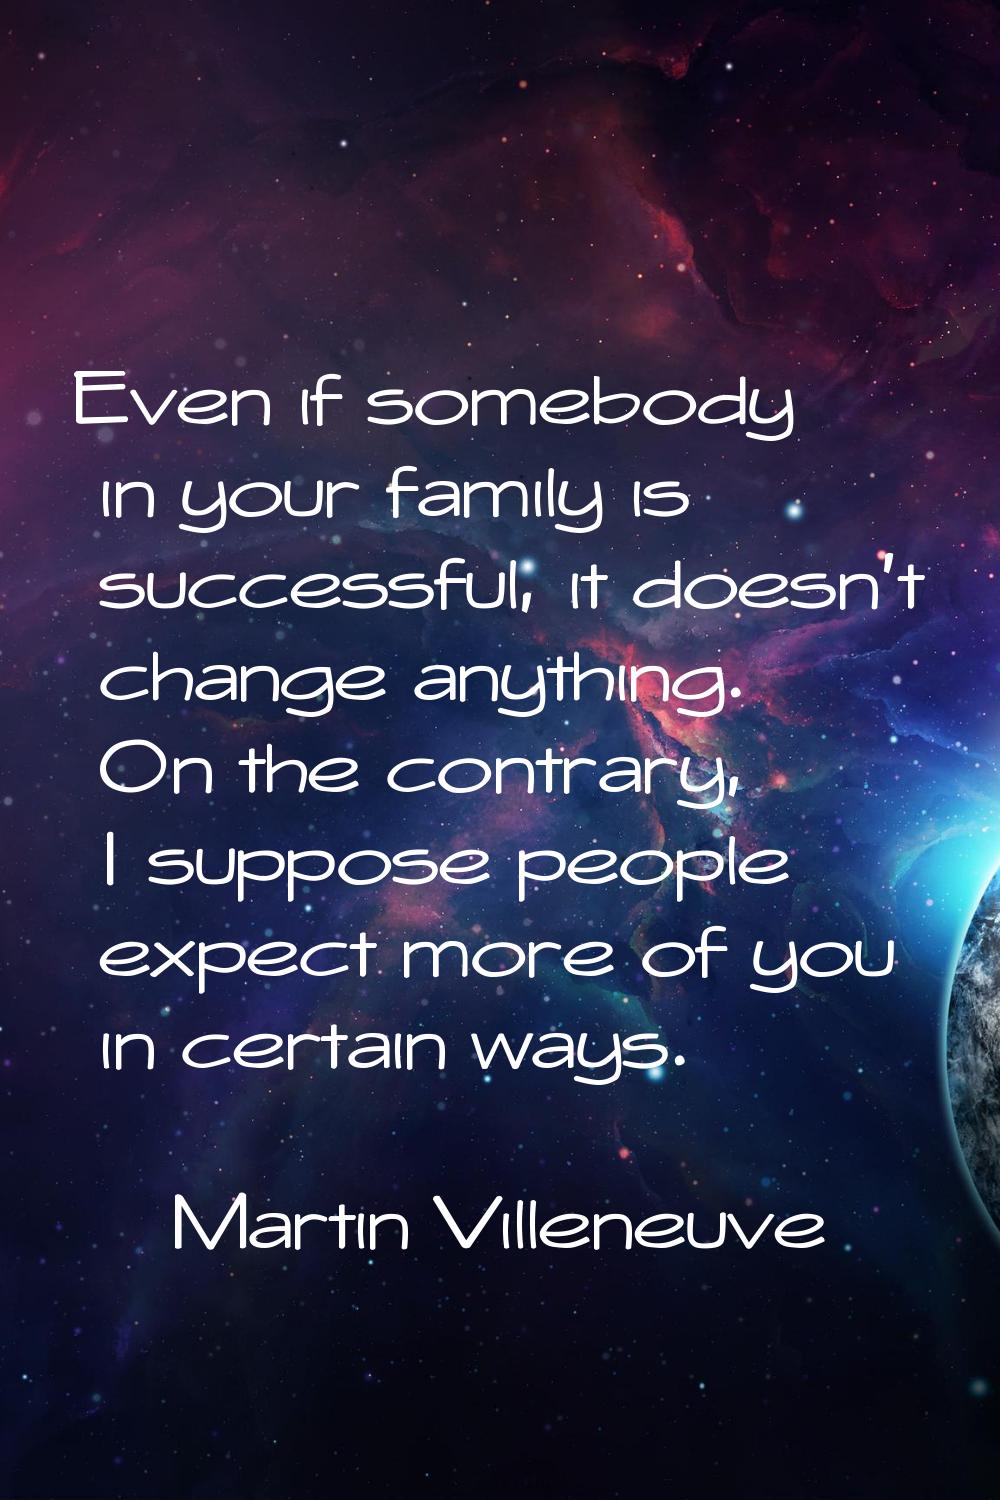 Even if somebody in your family is successful, it doesn't change anything. On the contrary, I suppo